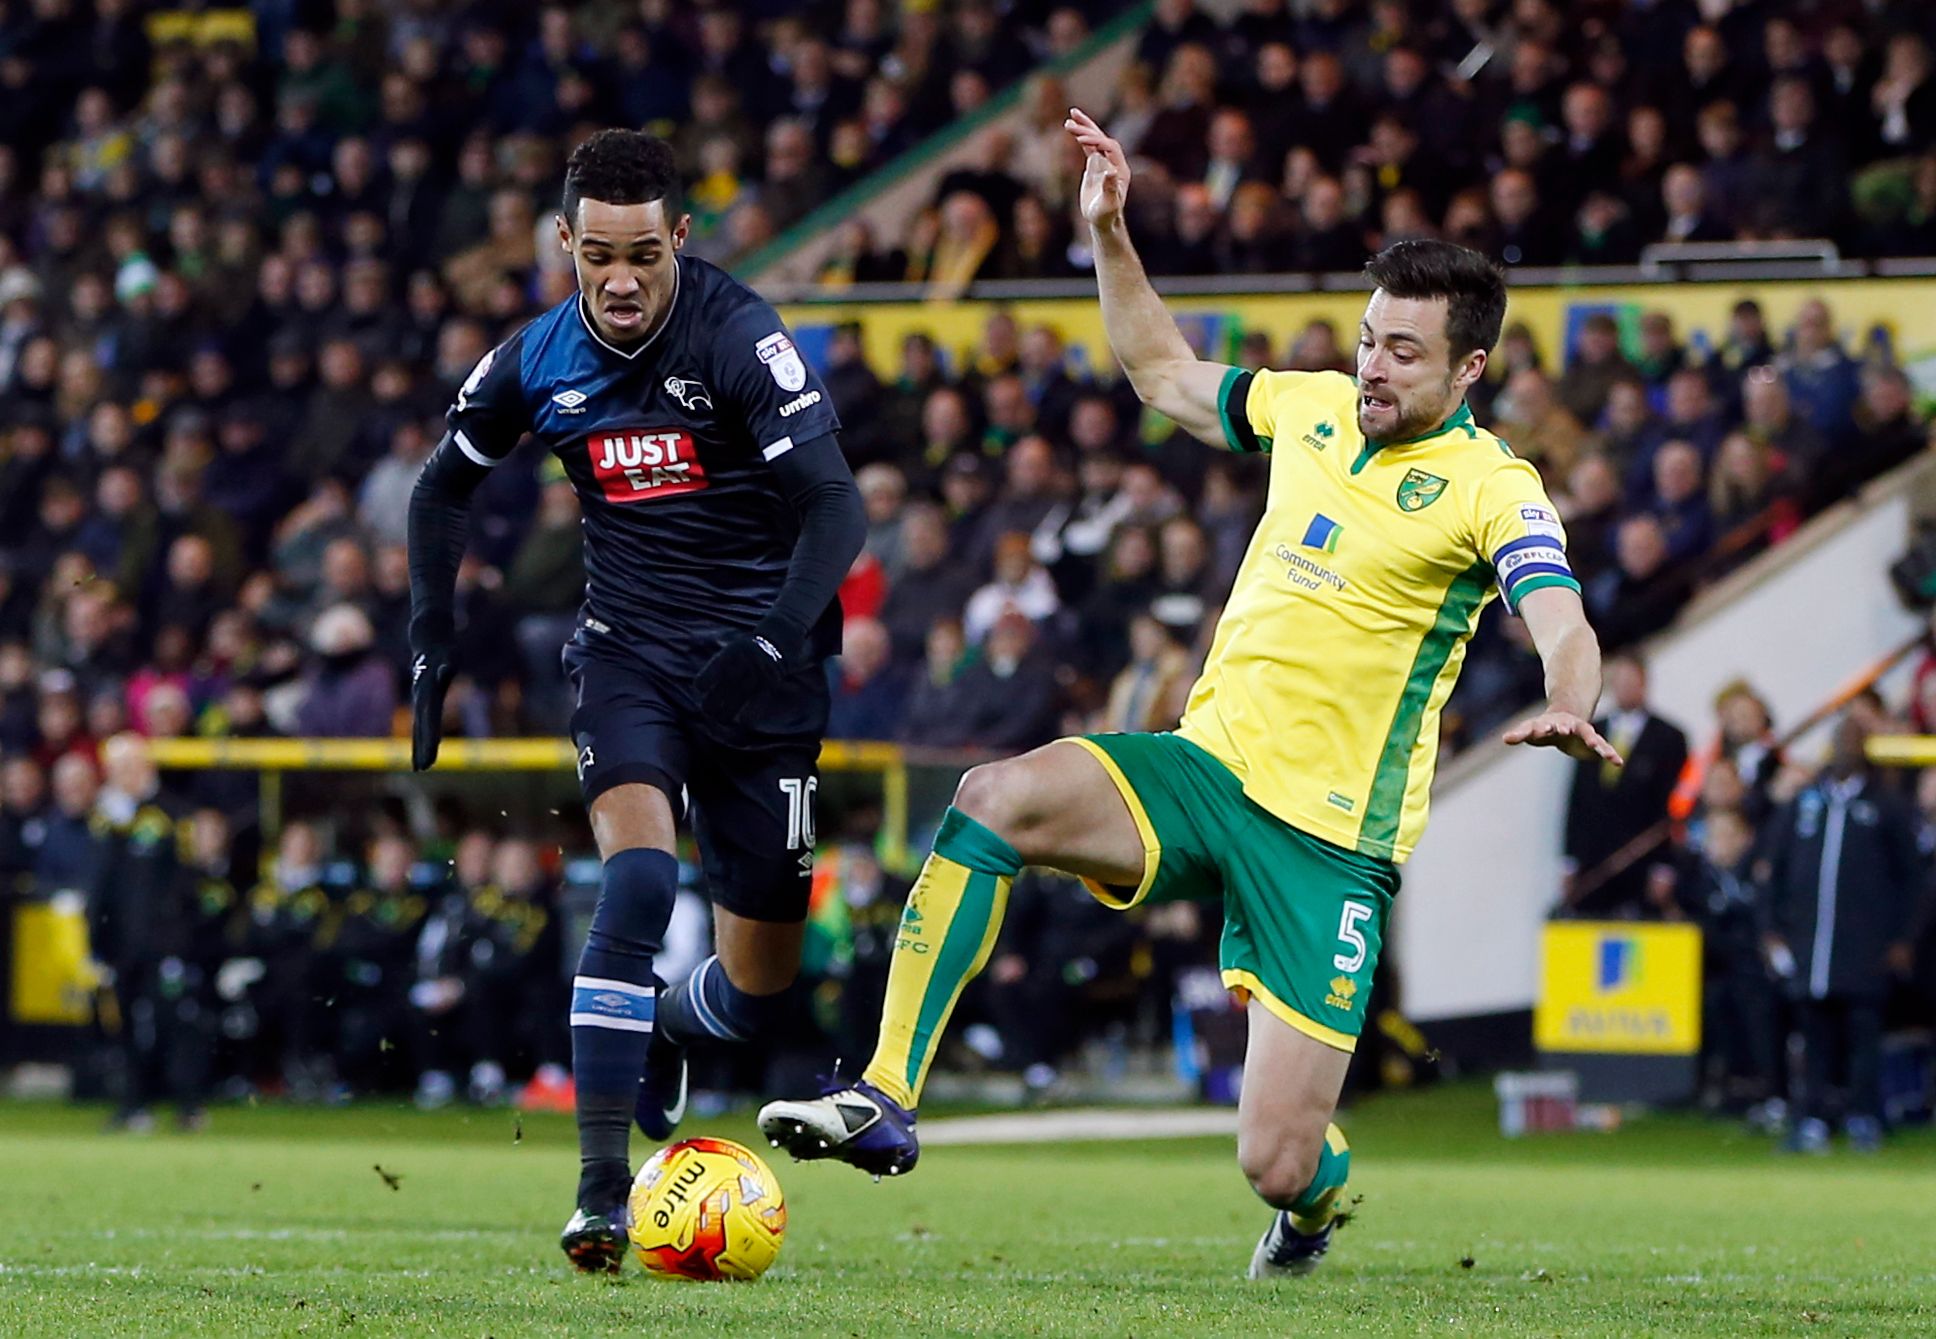 Britain Football Soccer - Norwich City v Derby County - Sky Bet Championship - Carrow Road - 2/1/17 Norwich City's Russell Martin in action with Derby County's Tom Ince Mandatory Credit: Action Images / Paul Childs Livepic EDITORIAL USE ONLY. No use with unauthorized audio, video, data, fixture lists, club/league logos or 